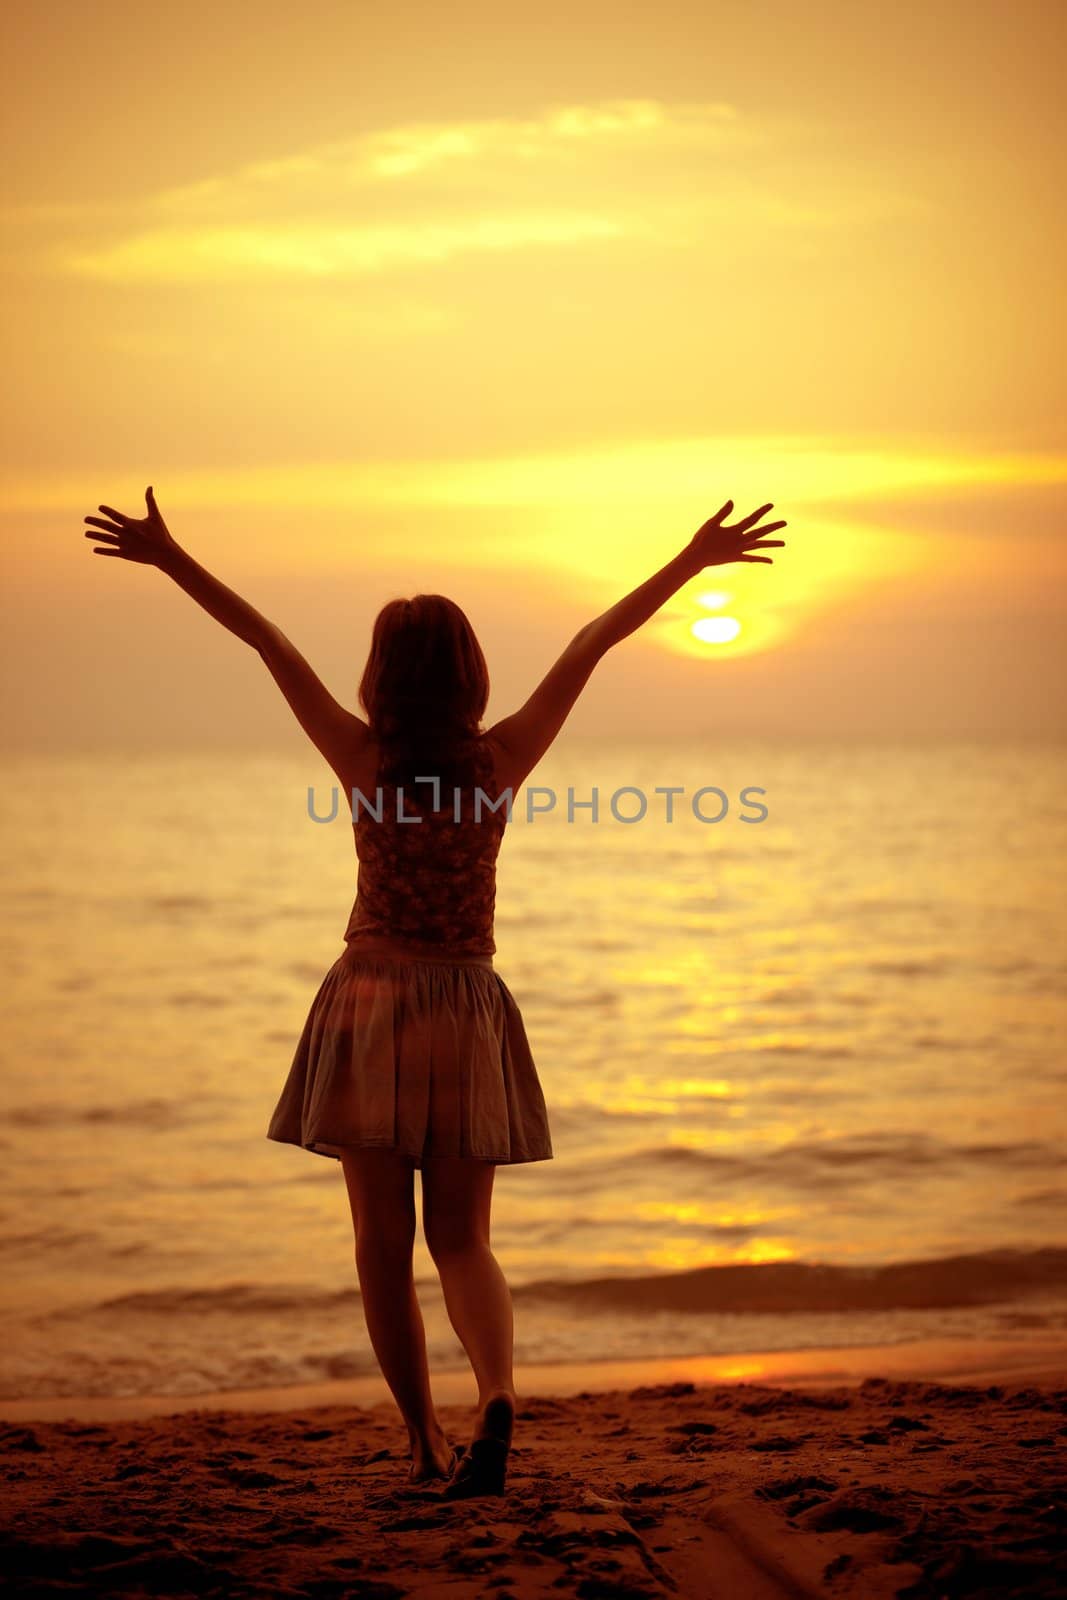 Silhouette of a girl in the beach